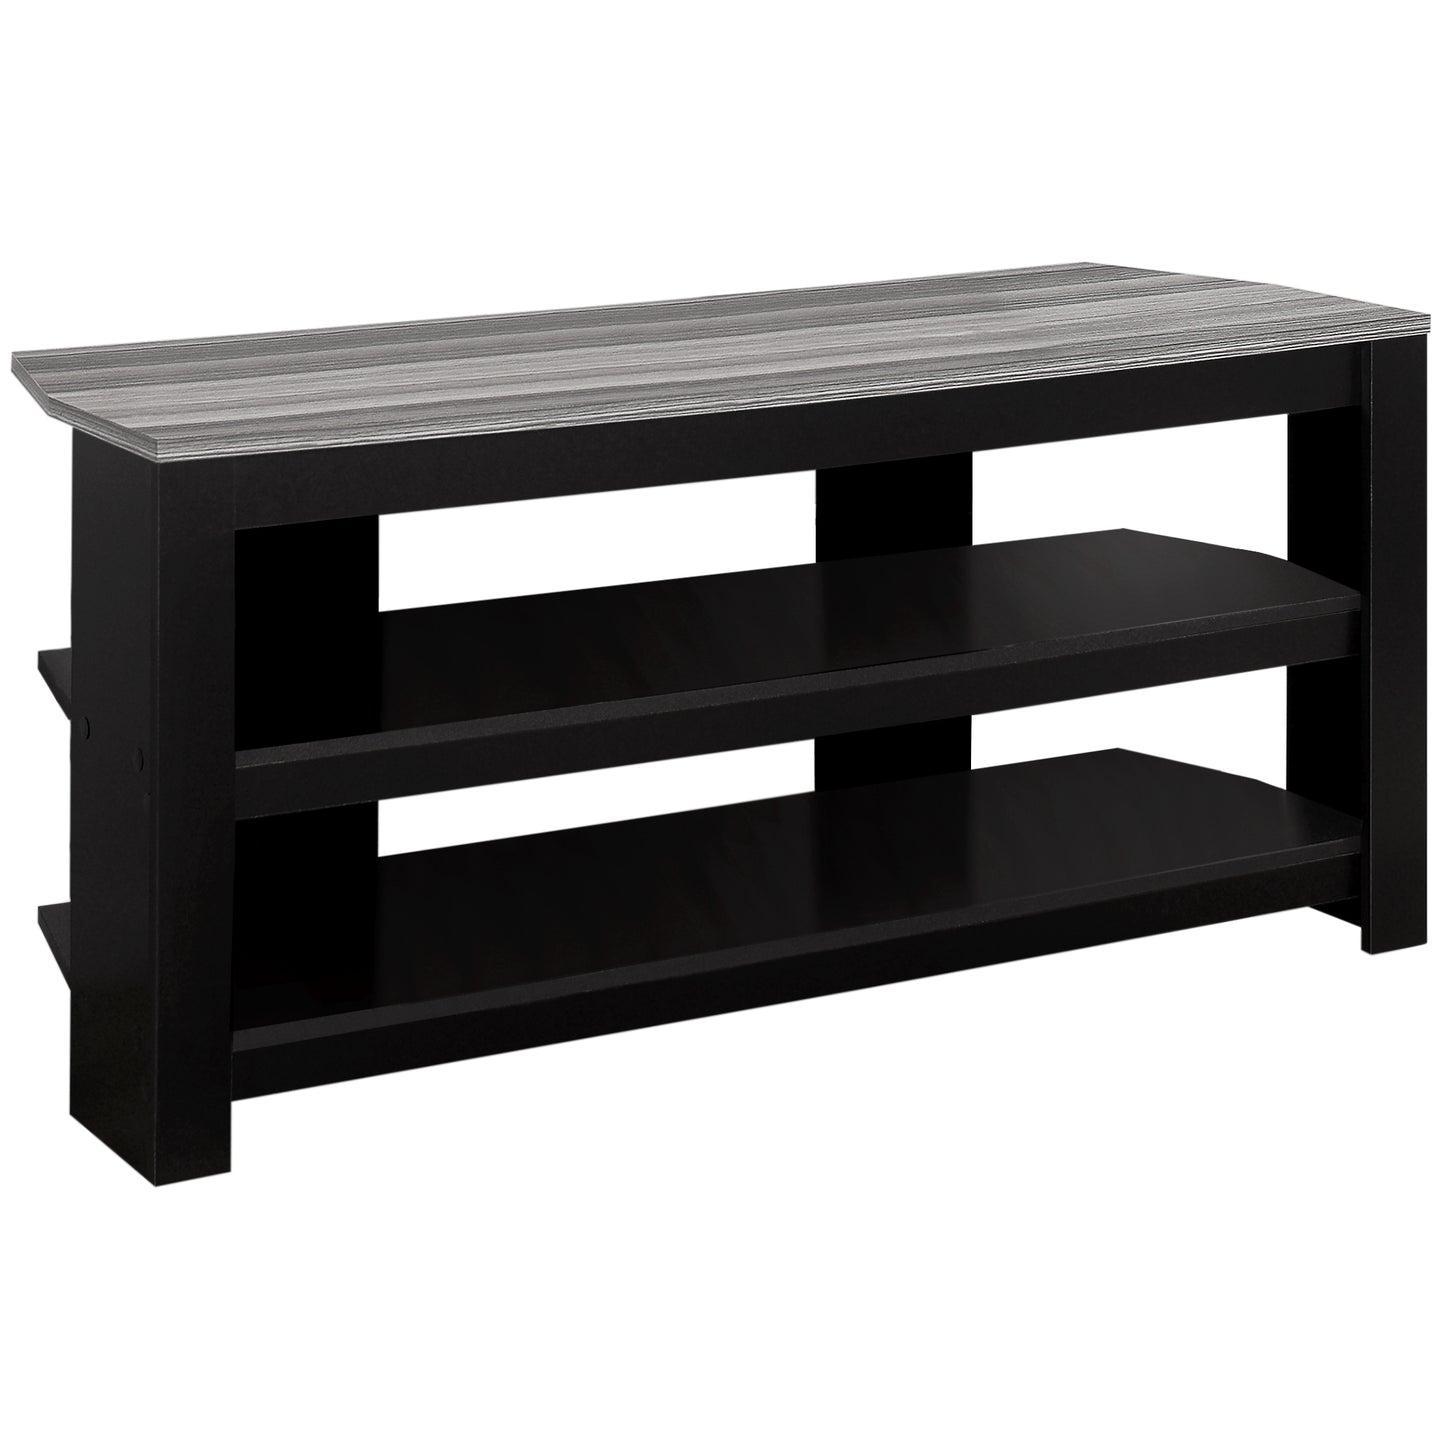 15.5" x 42" x 19.75" Black Grey Particle Board Laminate TV Stand